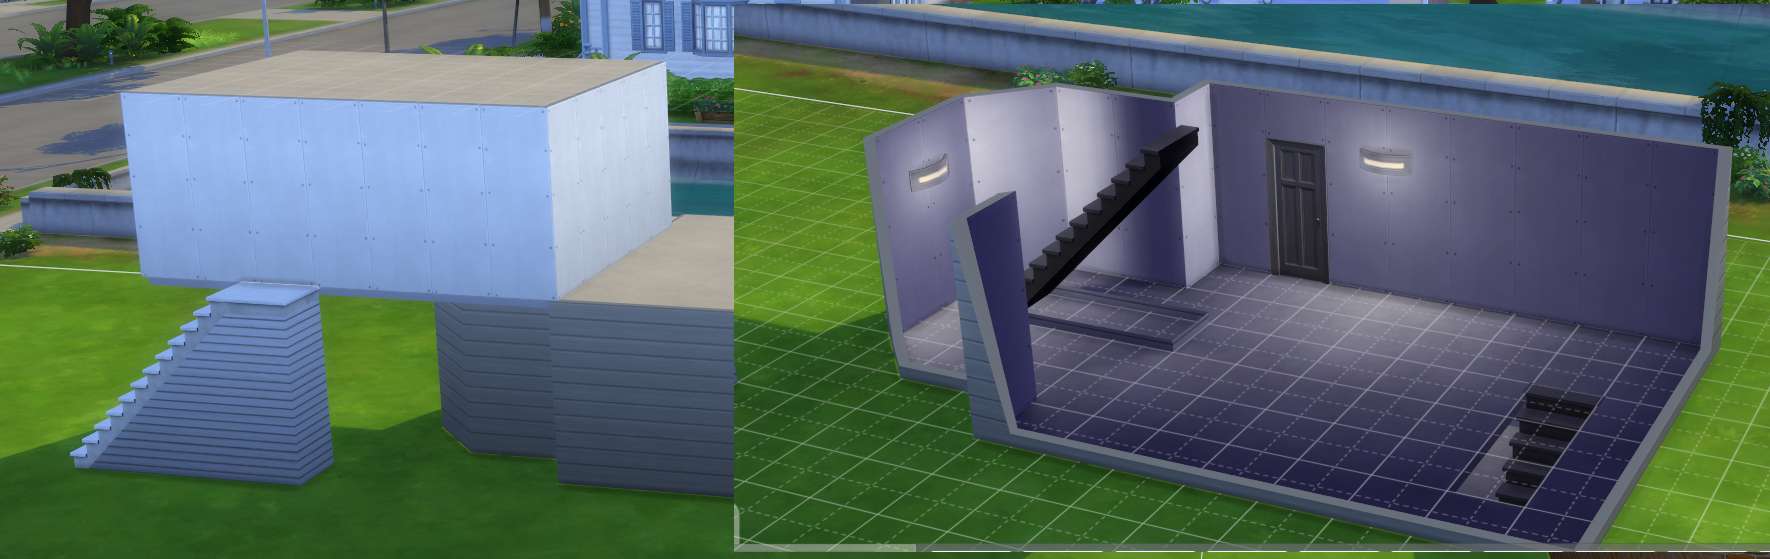 The Sims 10 Building: Stairs and Basements